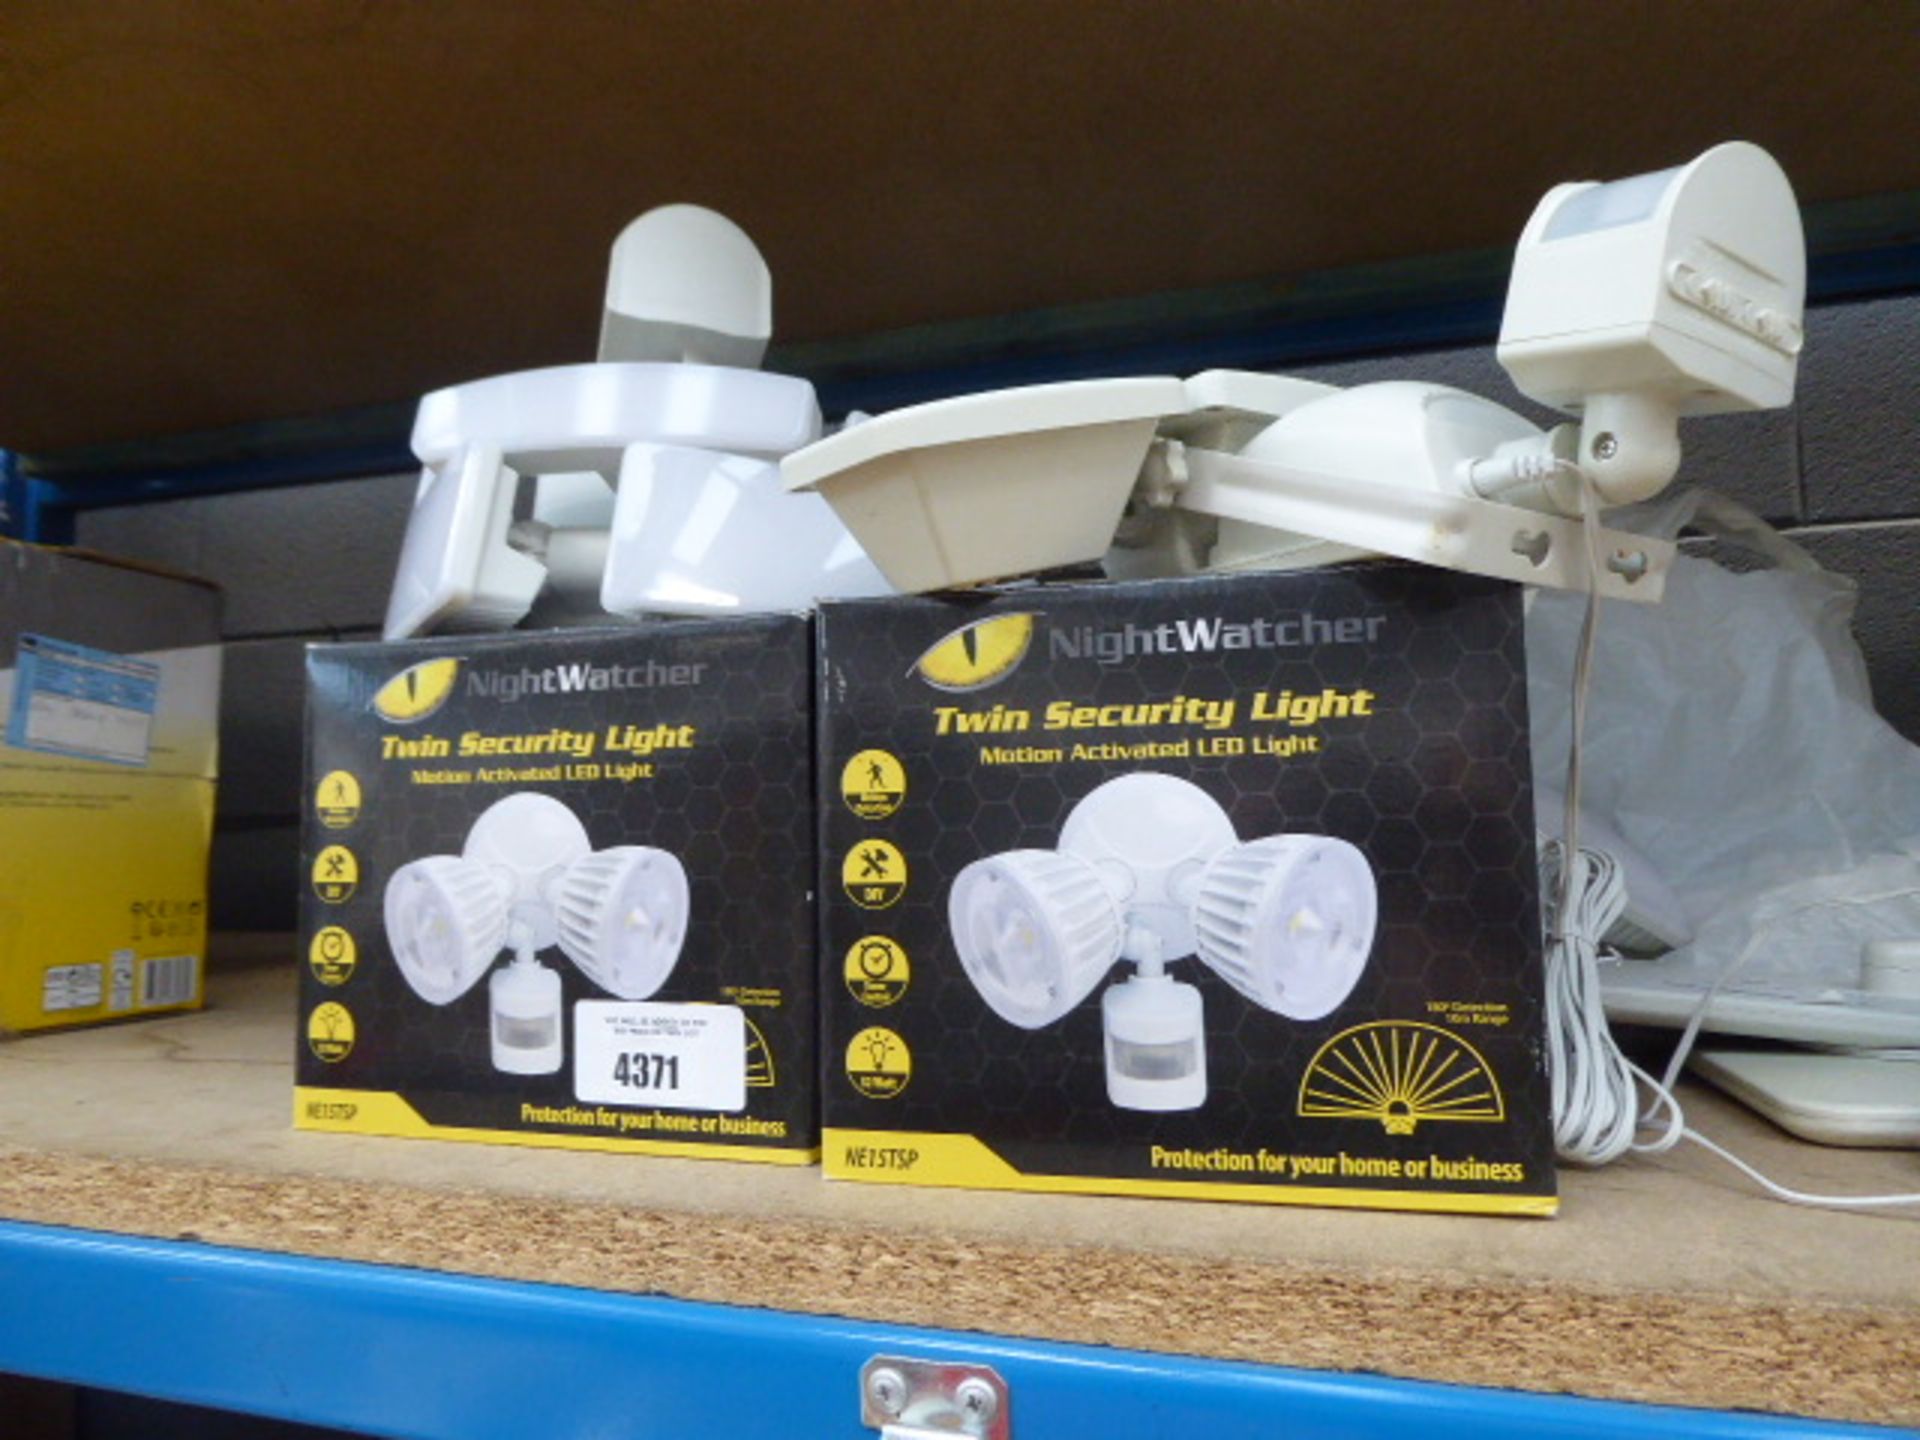 2 boxed and 3 unboxed Nightwatcher security lights